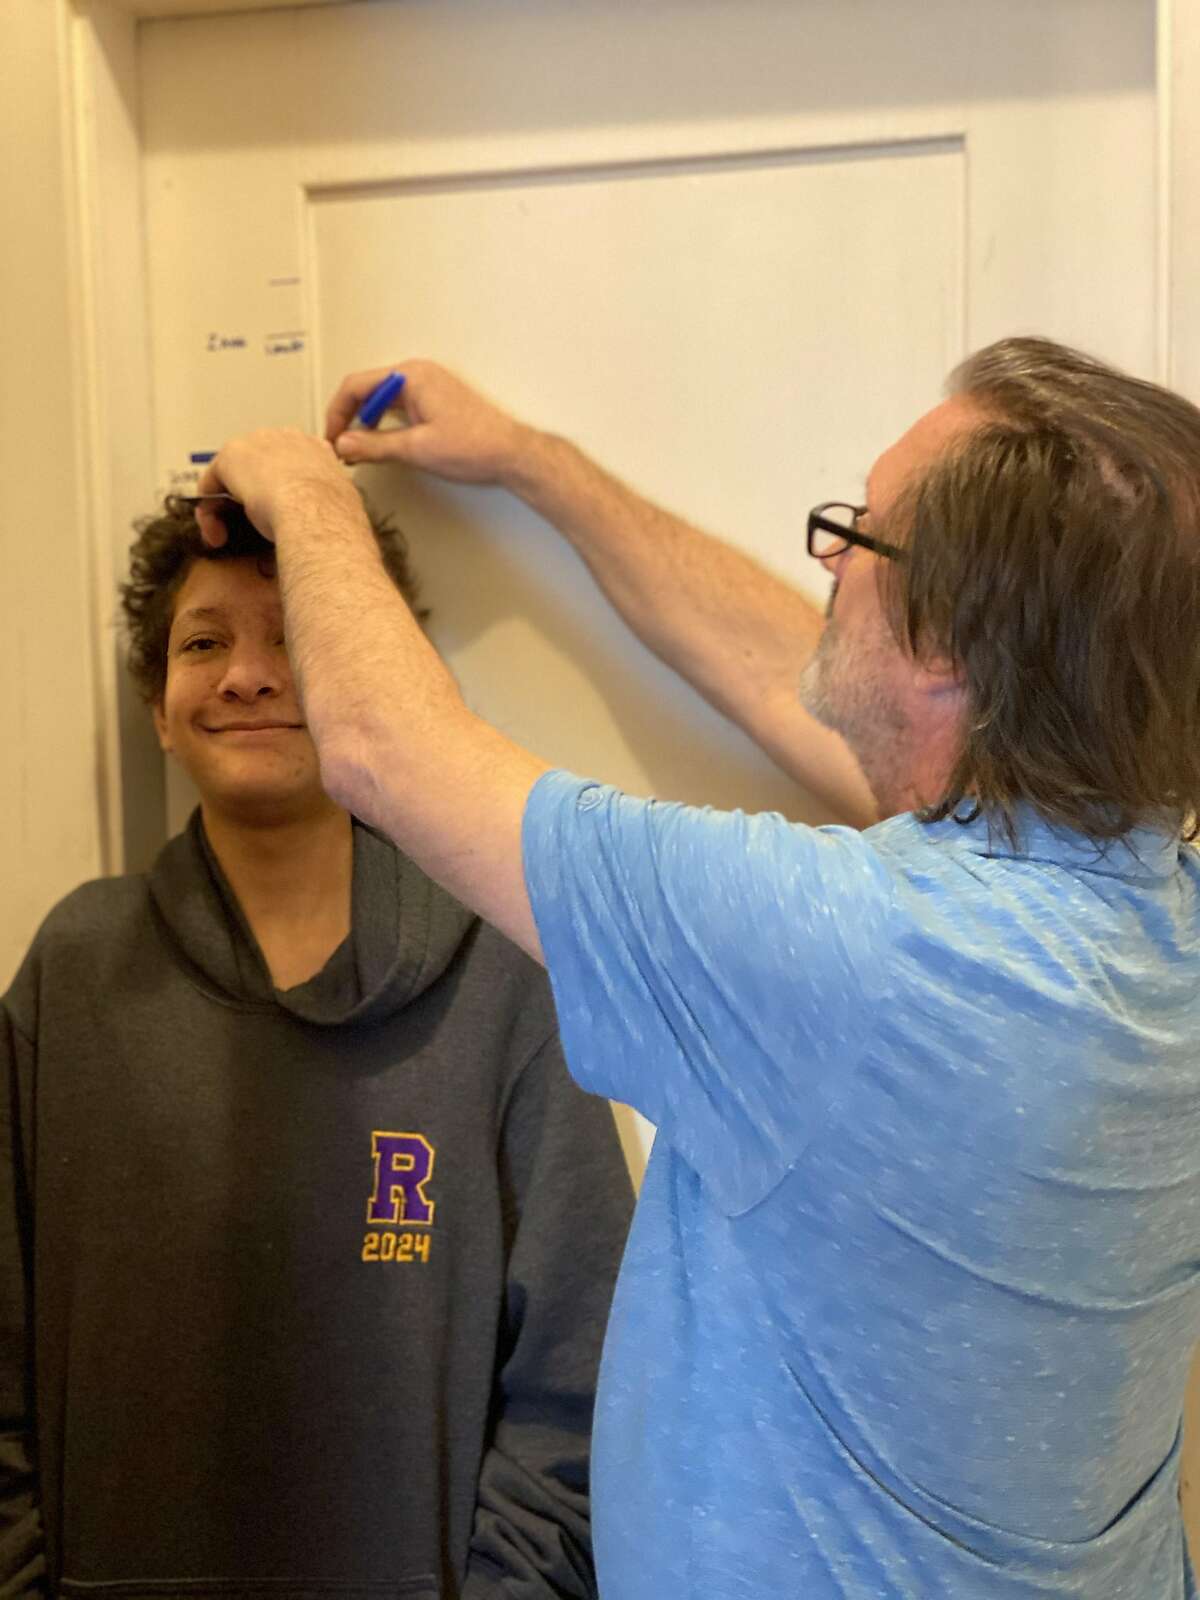 Aidan Fisher-Paulson gets his height measured by his father, Brian, during the family's annual Talling of the Boys on January 1, 2021.